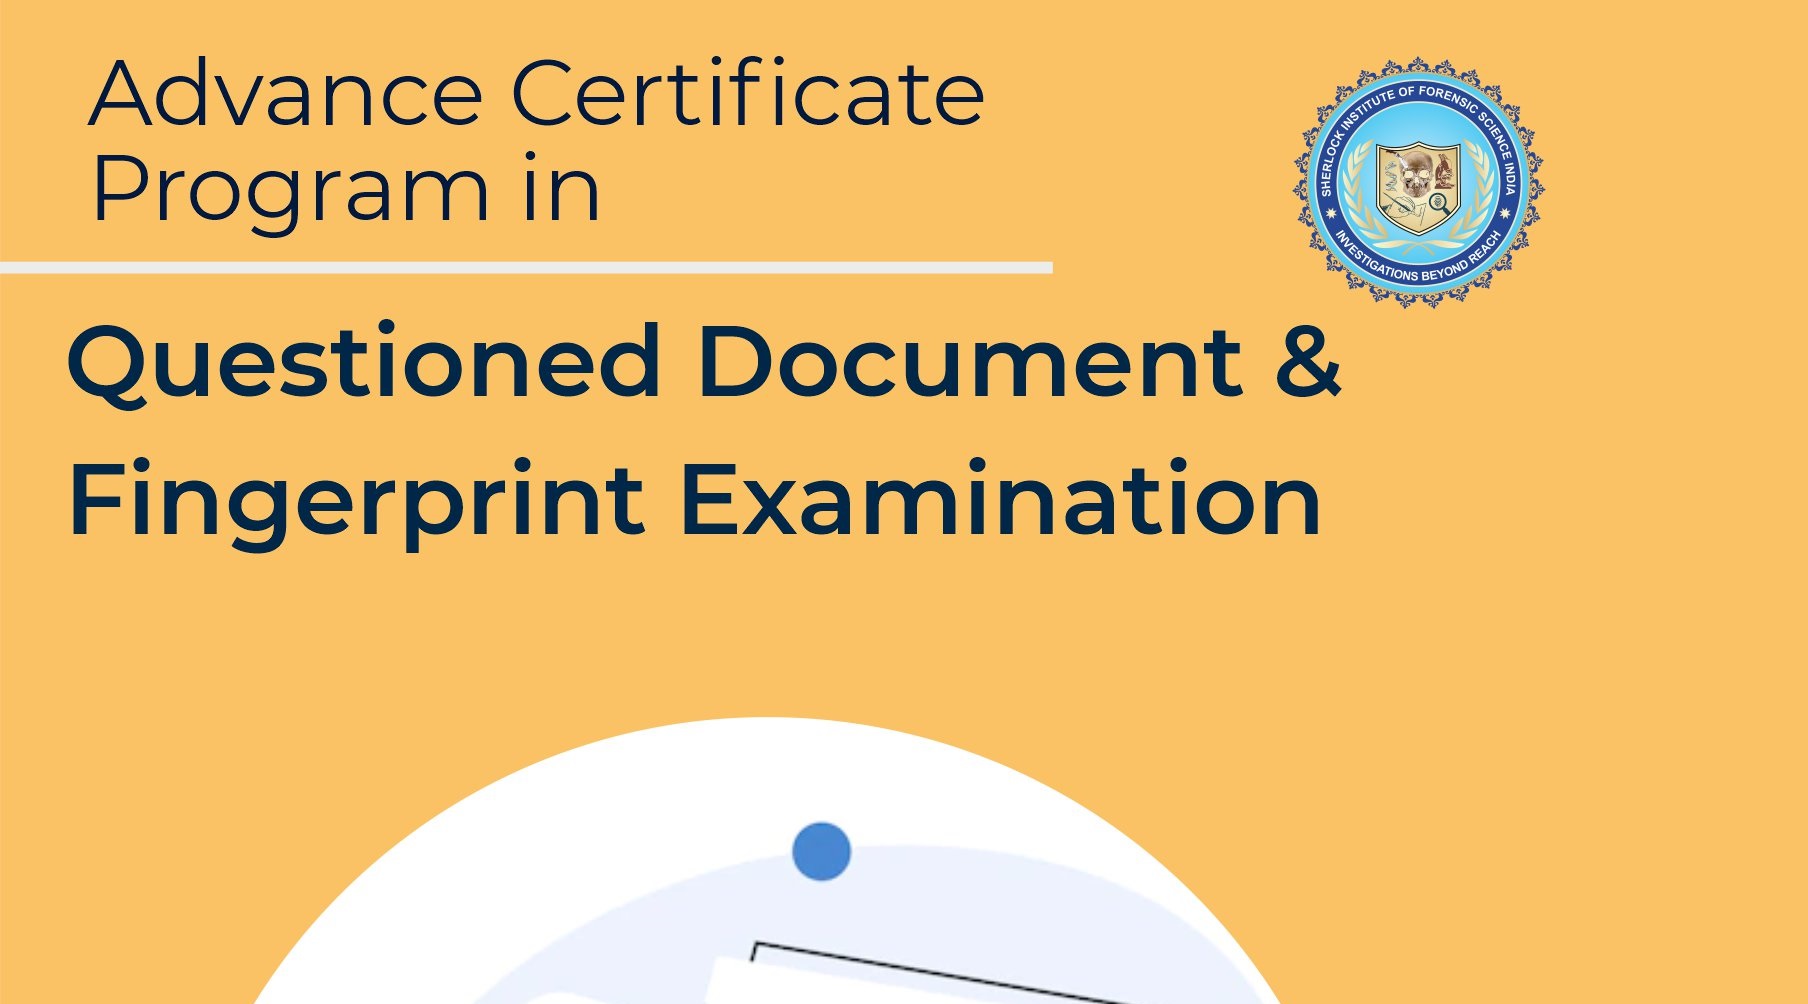 Questioned Document and Fingerprint Examination